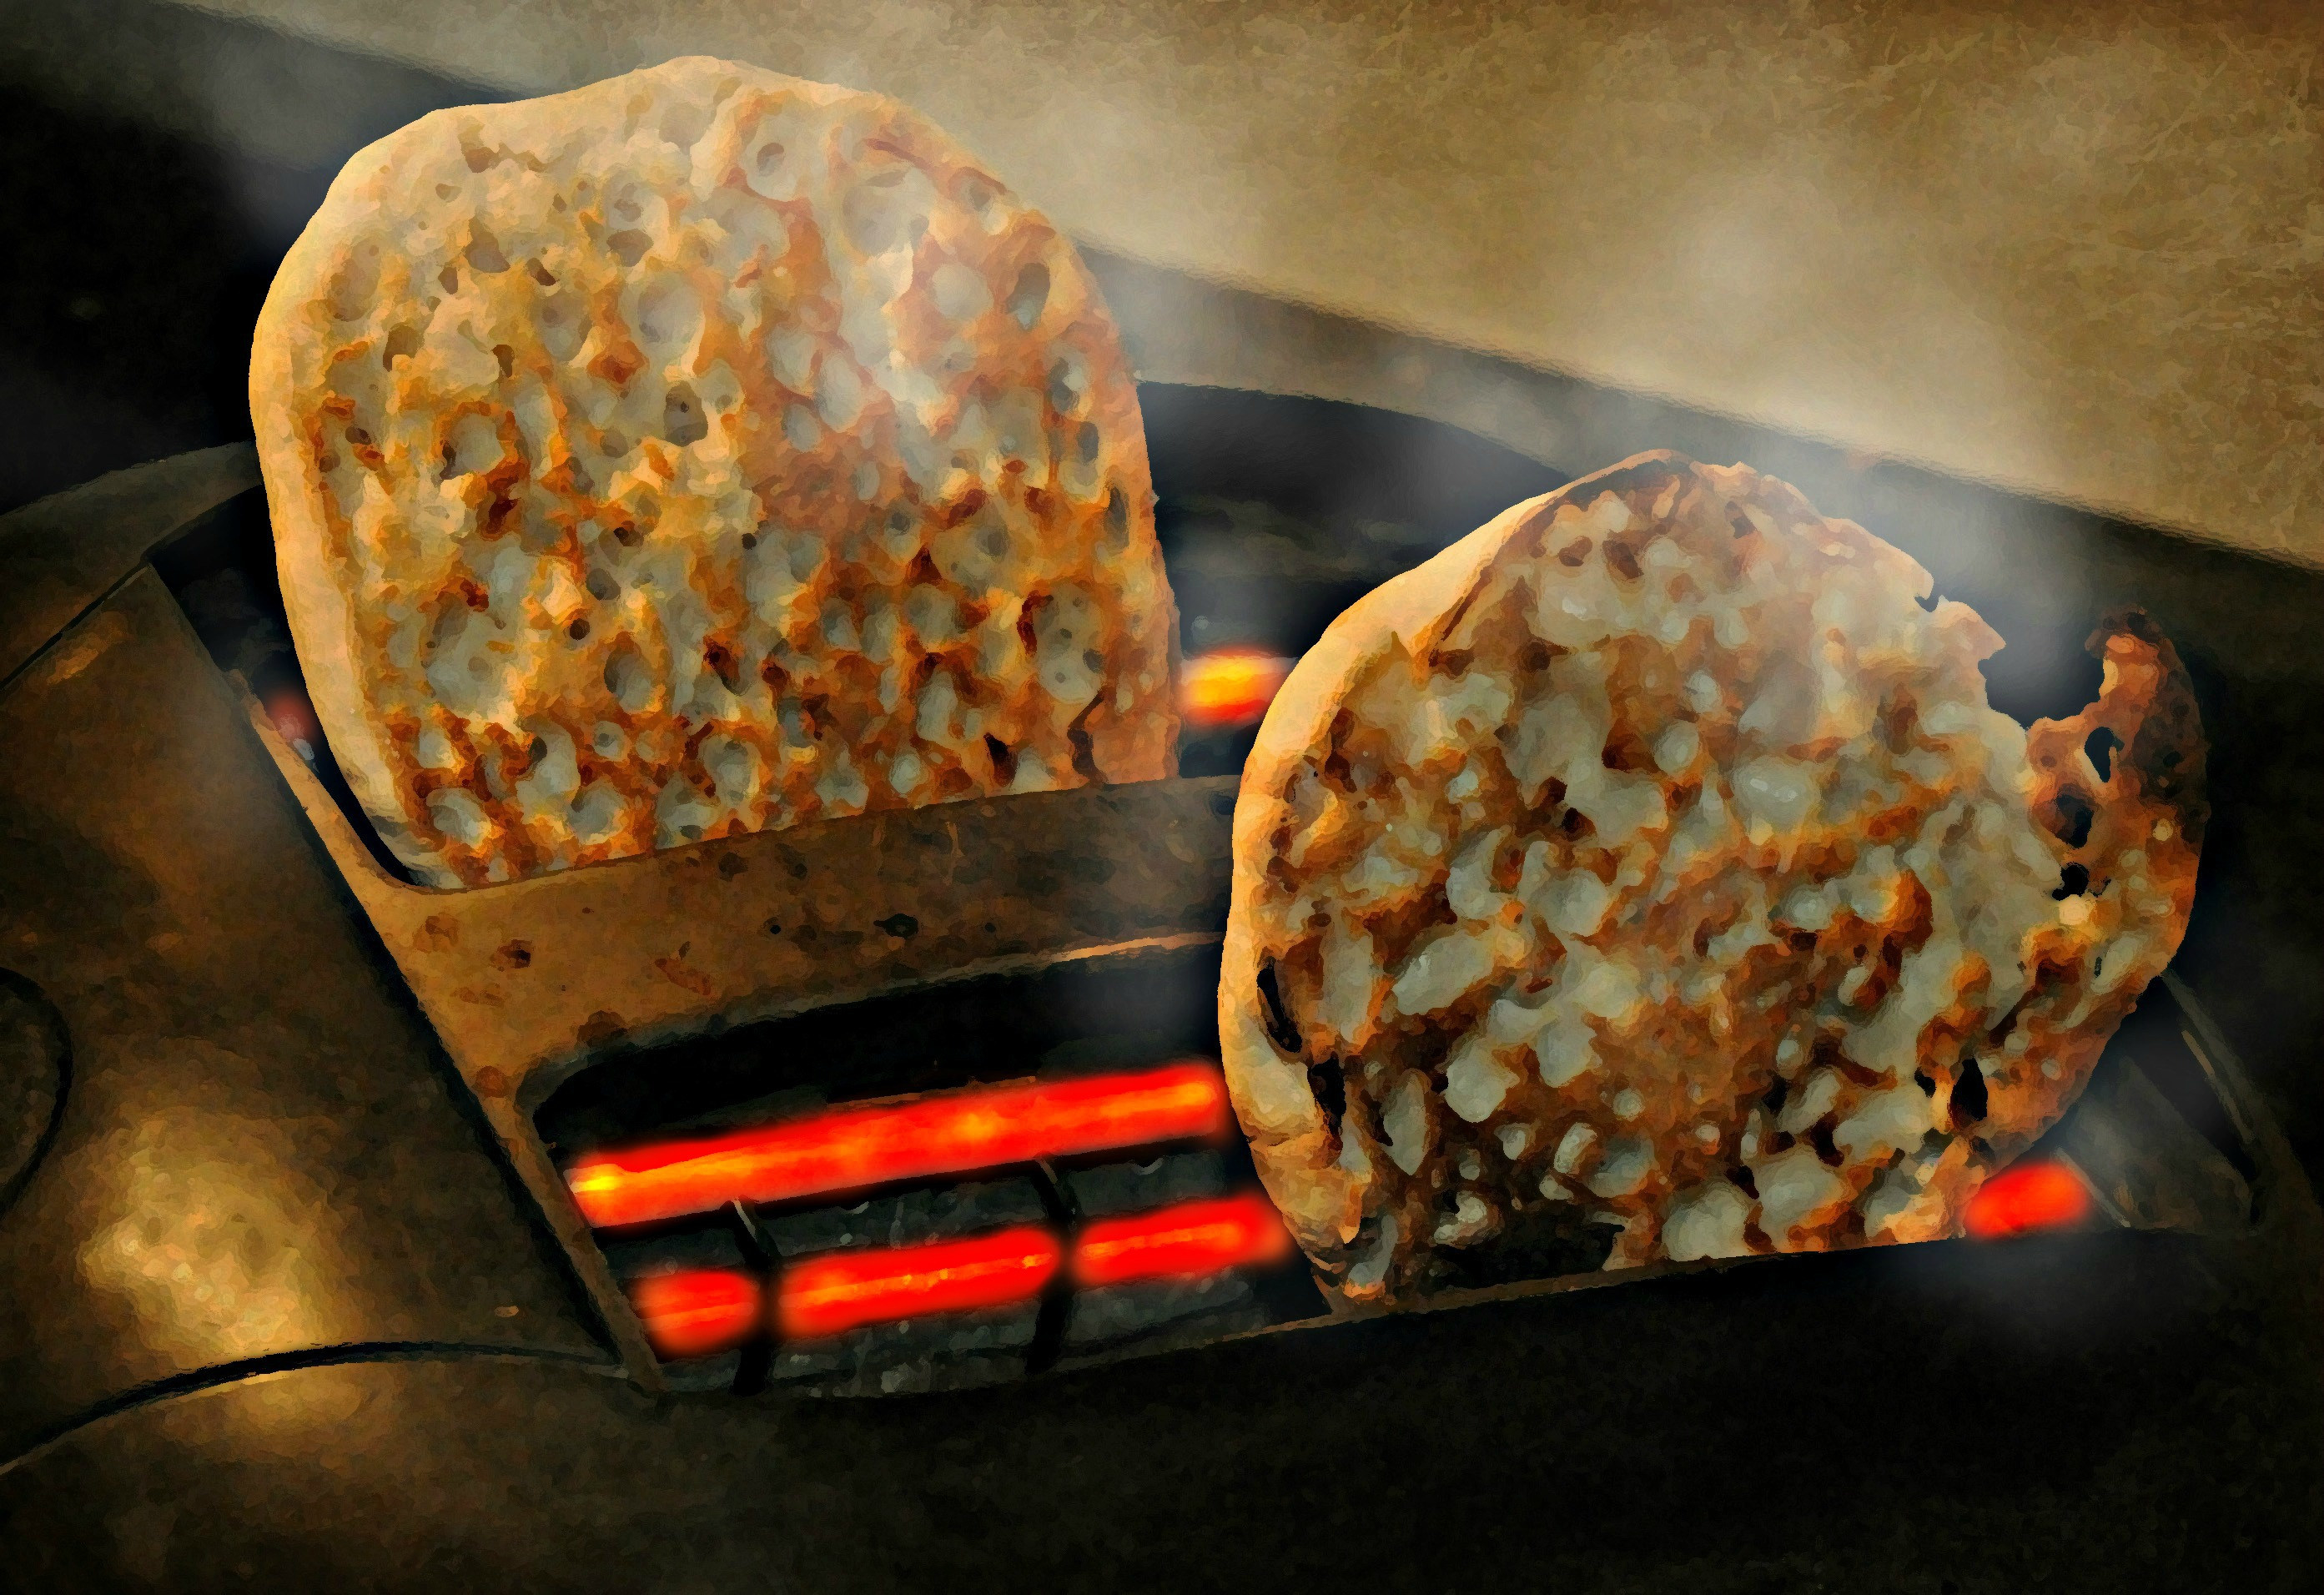 English muffins popping up out of a toaster